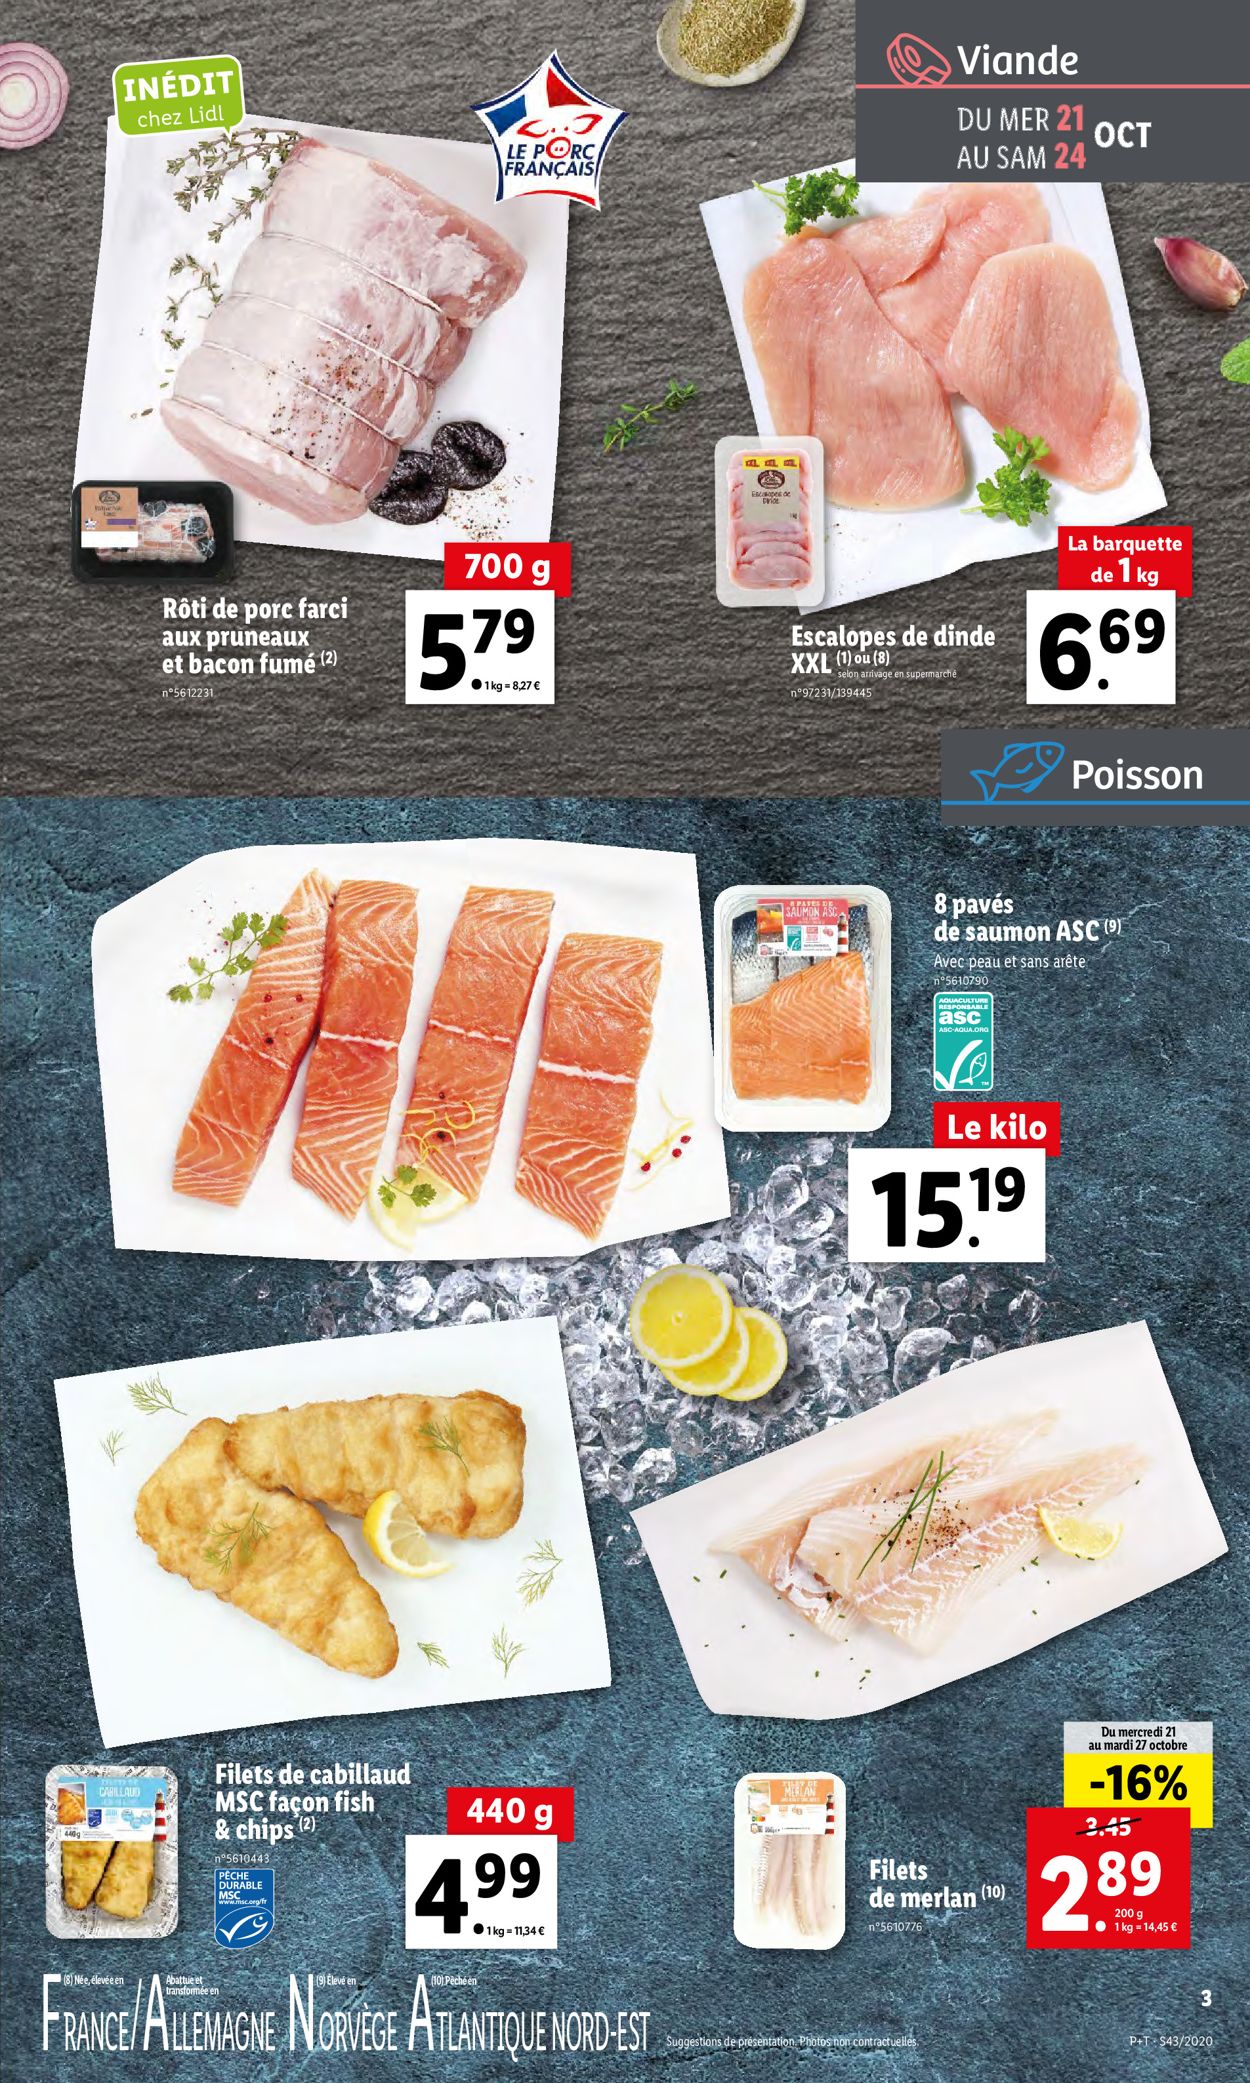 Lidl Catalogue - 21.10-27.10.2020 (Page 3)